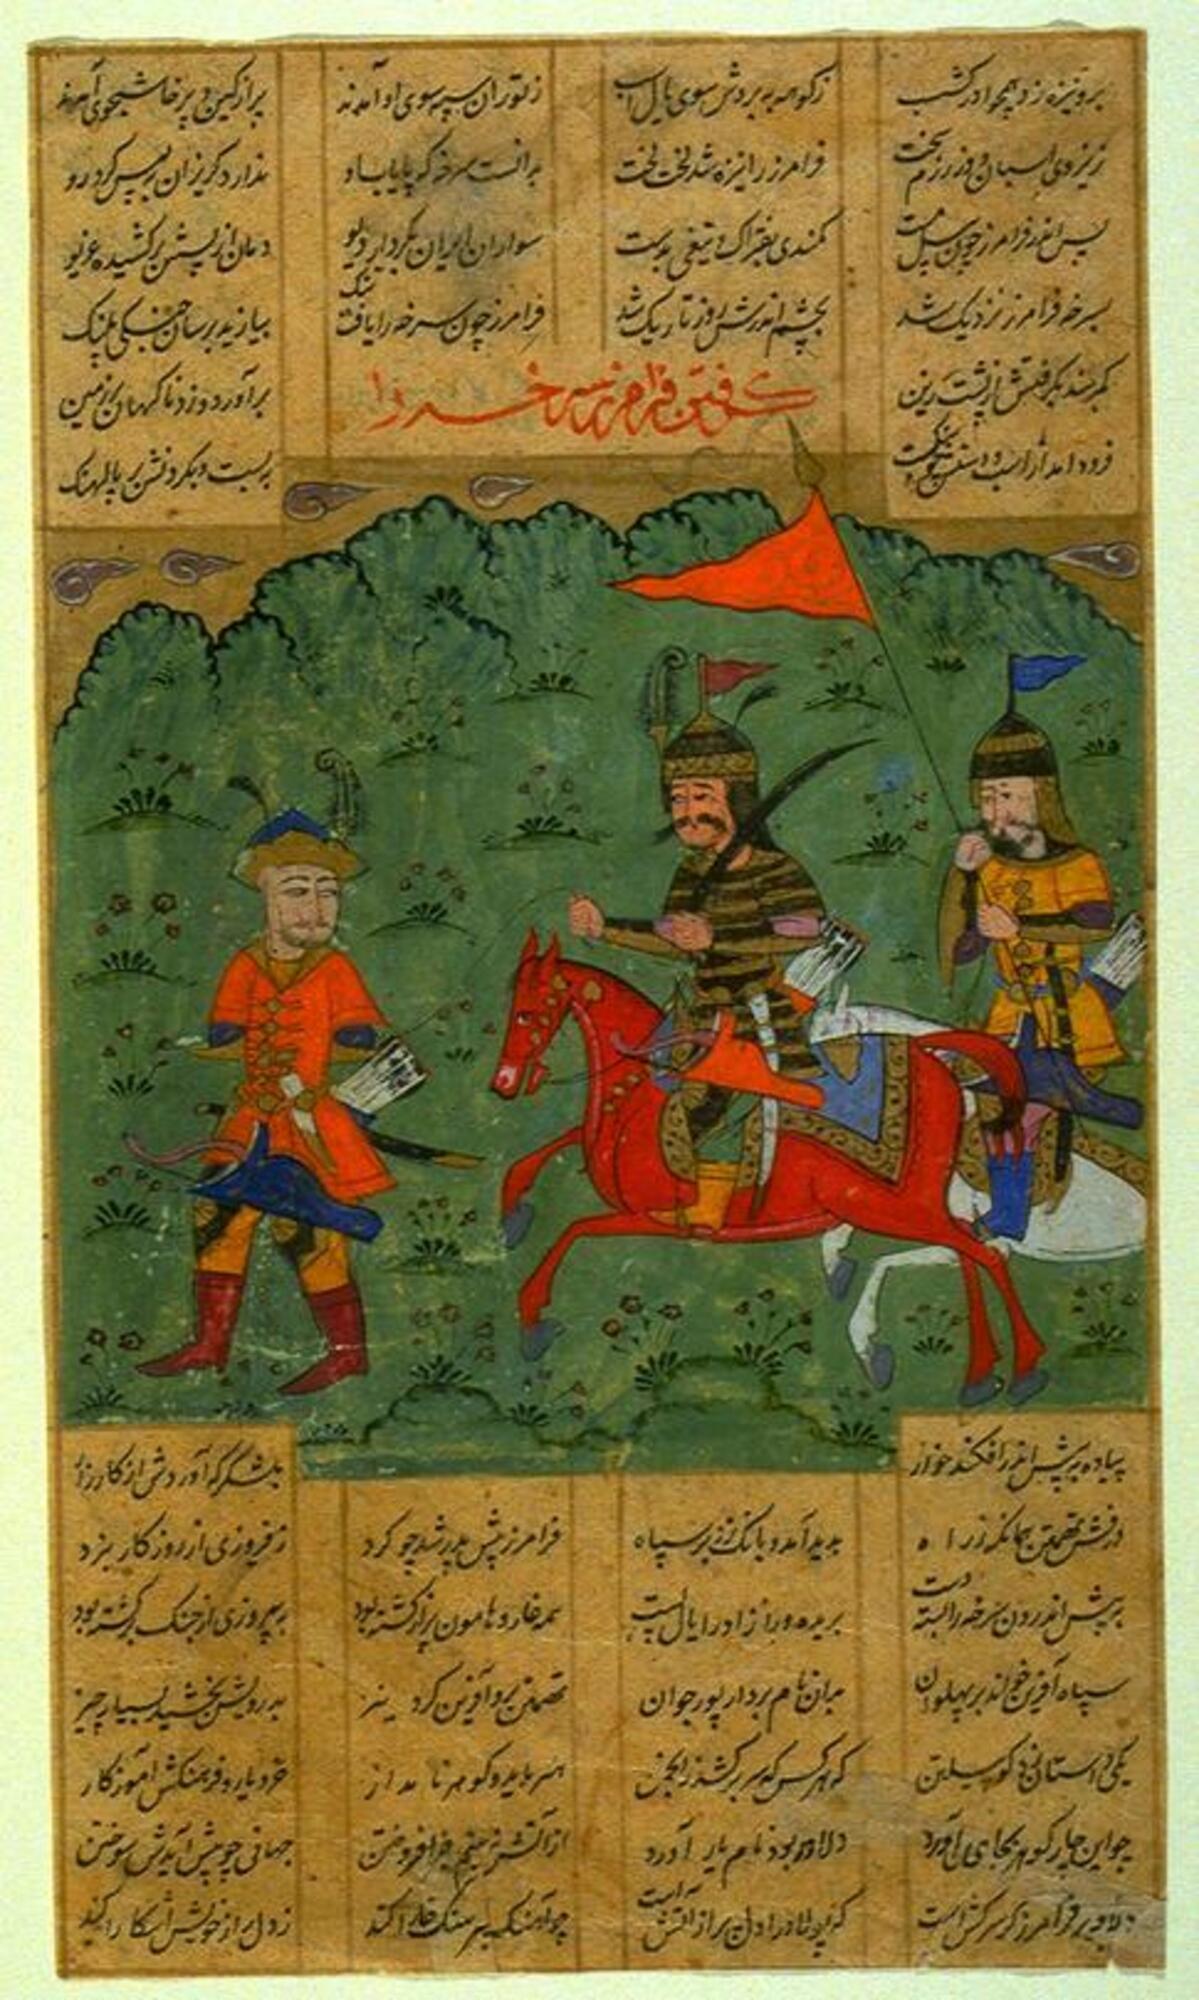 This Persian manuscript leaf is attributed to the 17th century Safavid period. Its format consists of two sections of calligraphy and a miniature (painted scene) in the middle. The painted scene features a grassy landscape with a mounted soldier and two standing figures. 